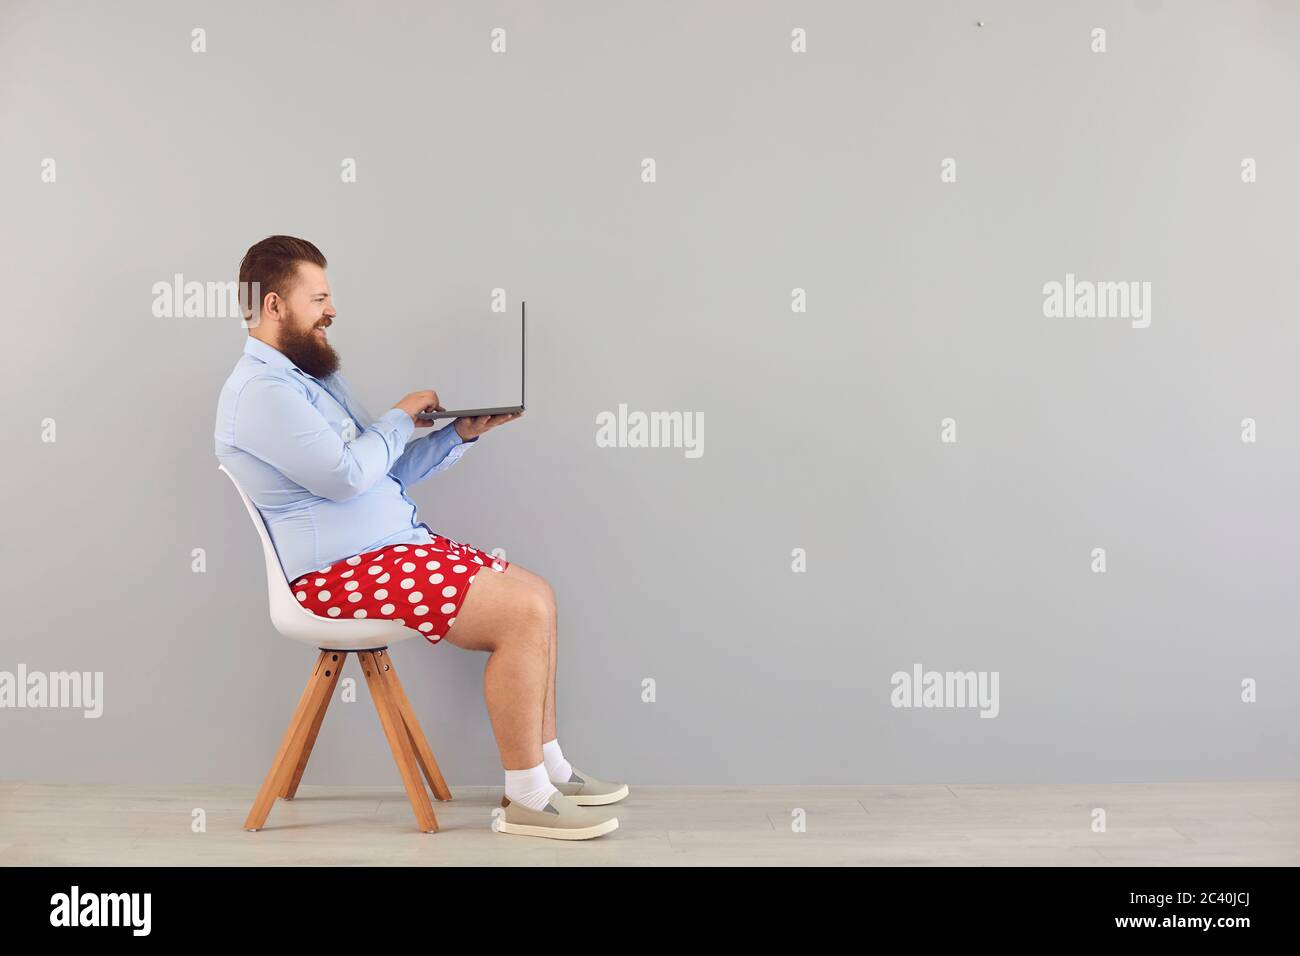 Funny fat man in a blue shirt and red shorts sitting on a chair working online using a laptop on a gray background. Stock Photo